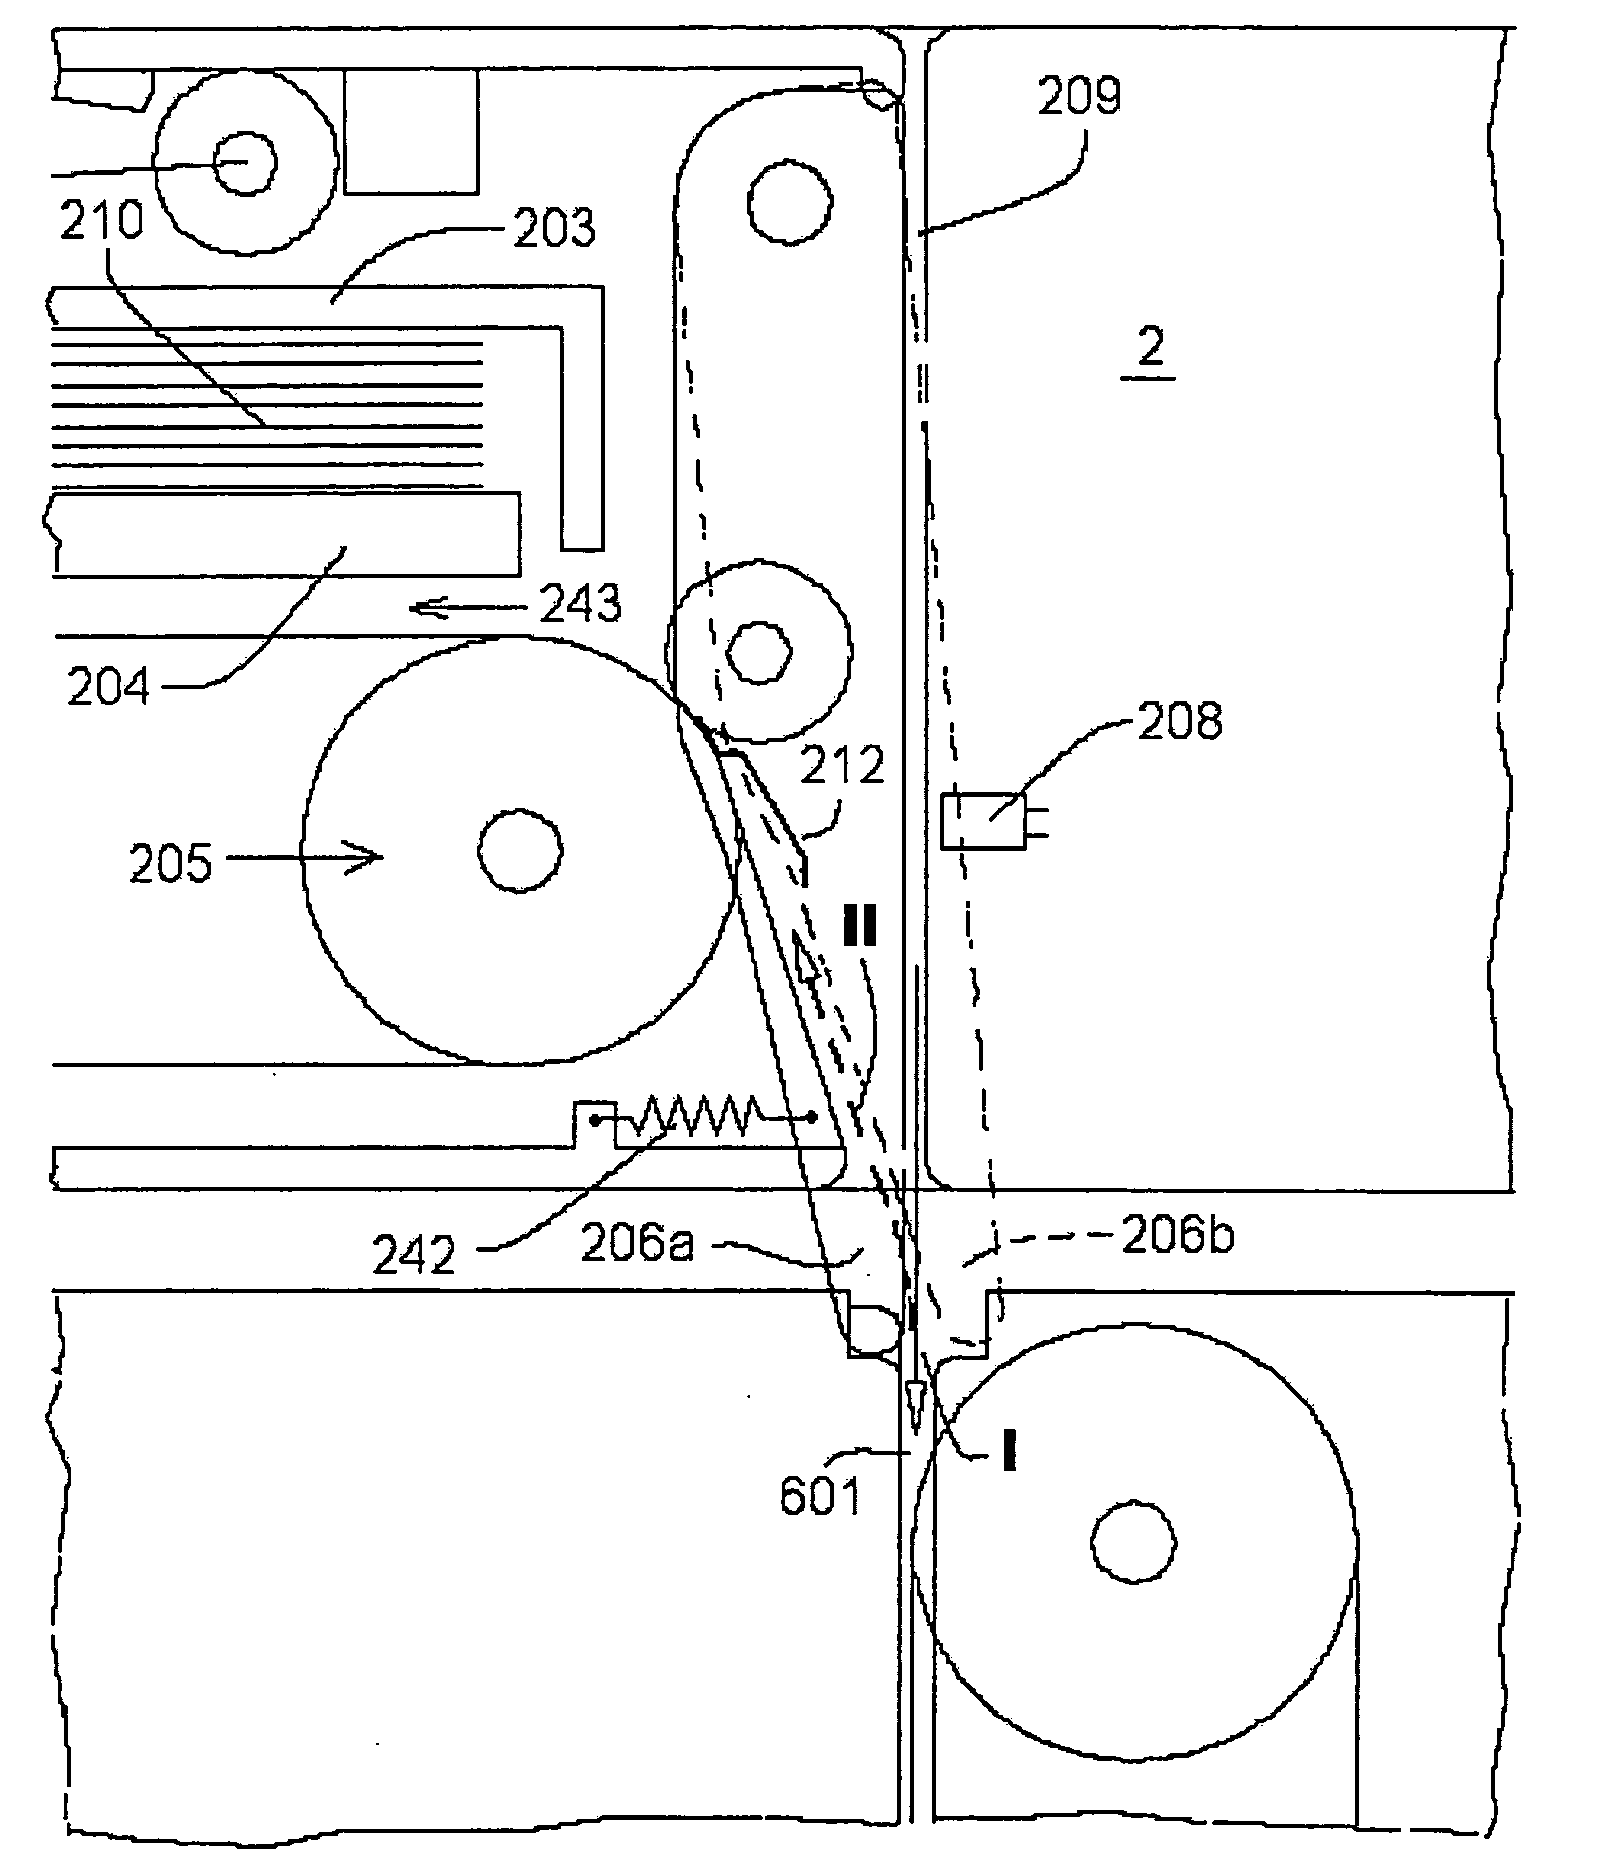 Energy-efficient compact device for dispensing and accumulating banknotes